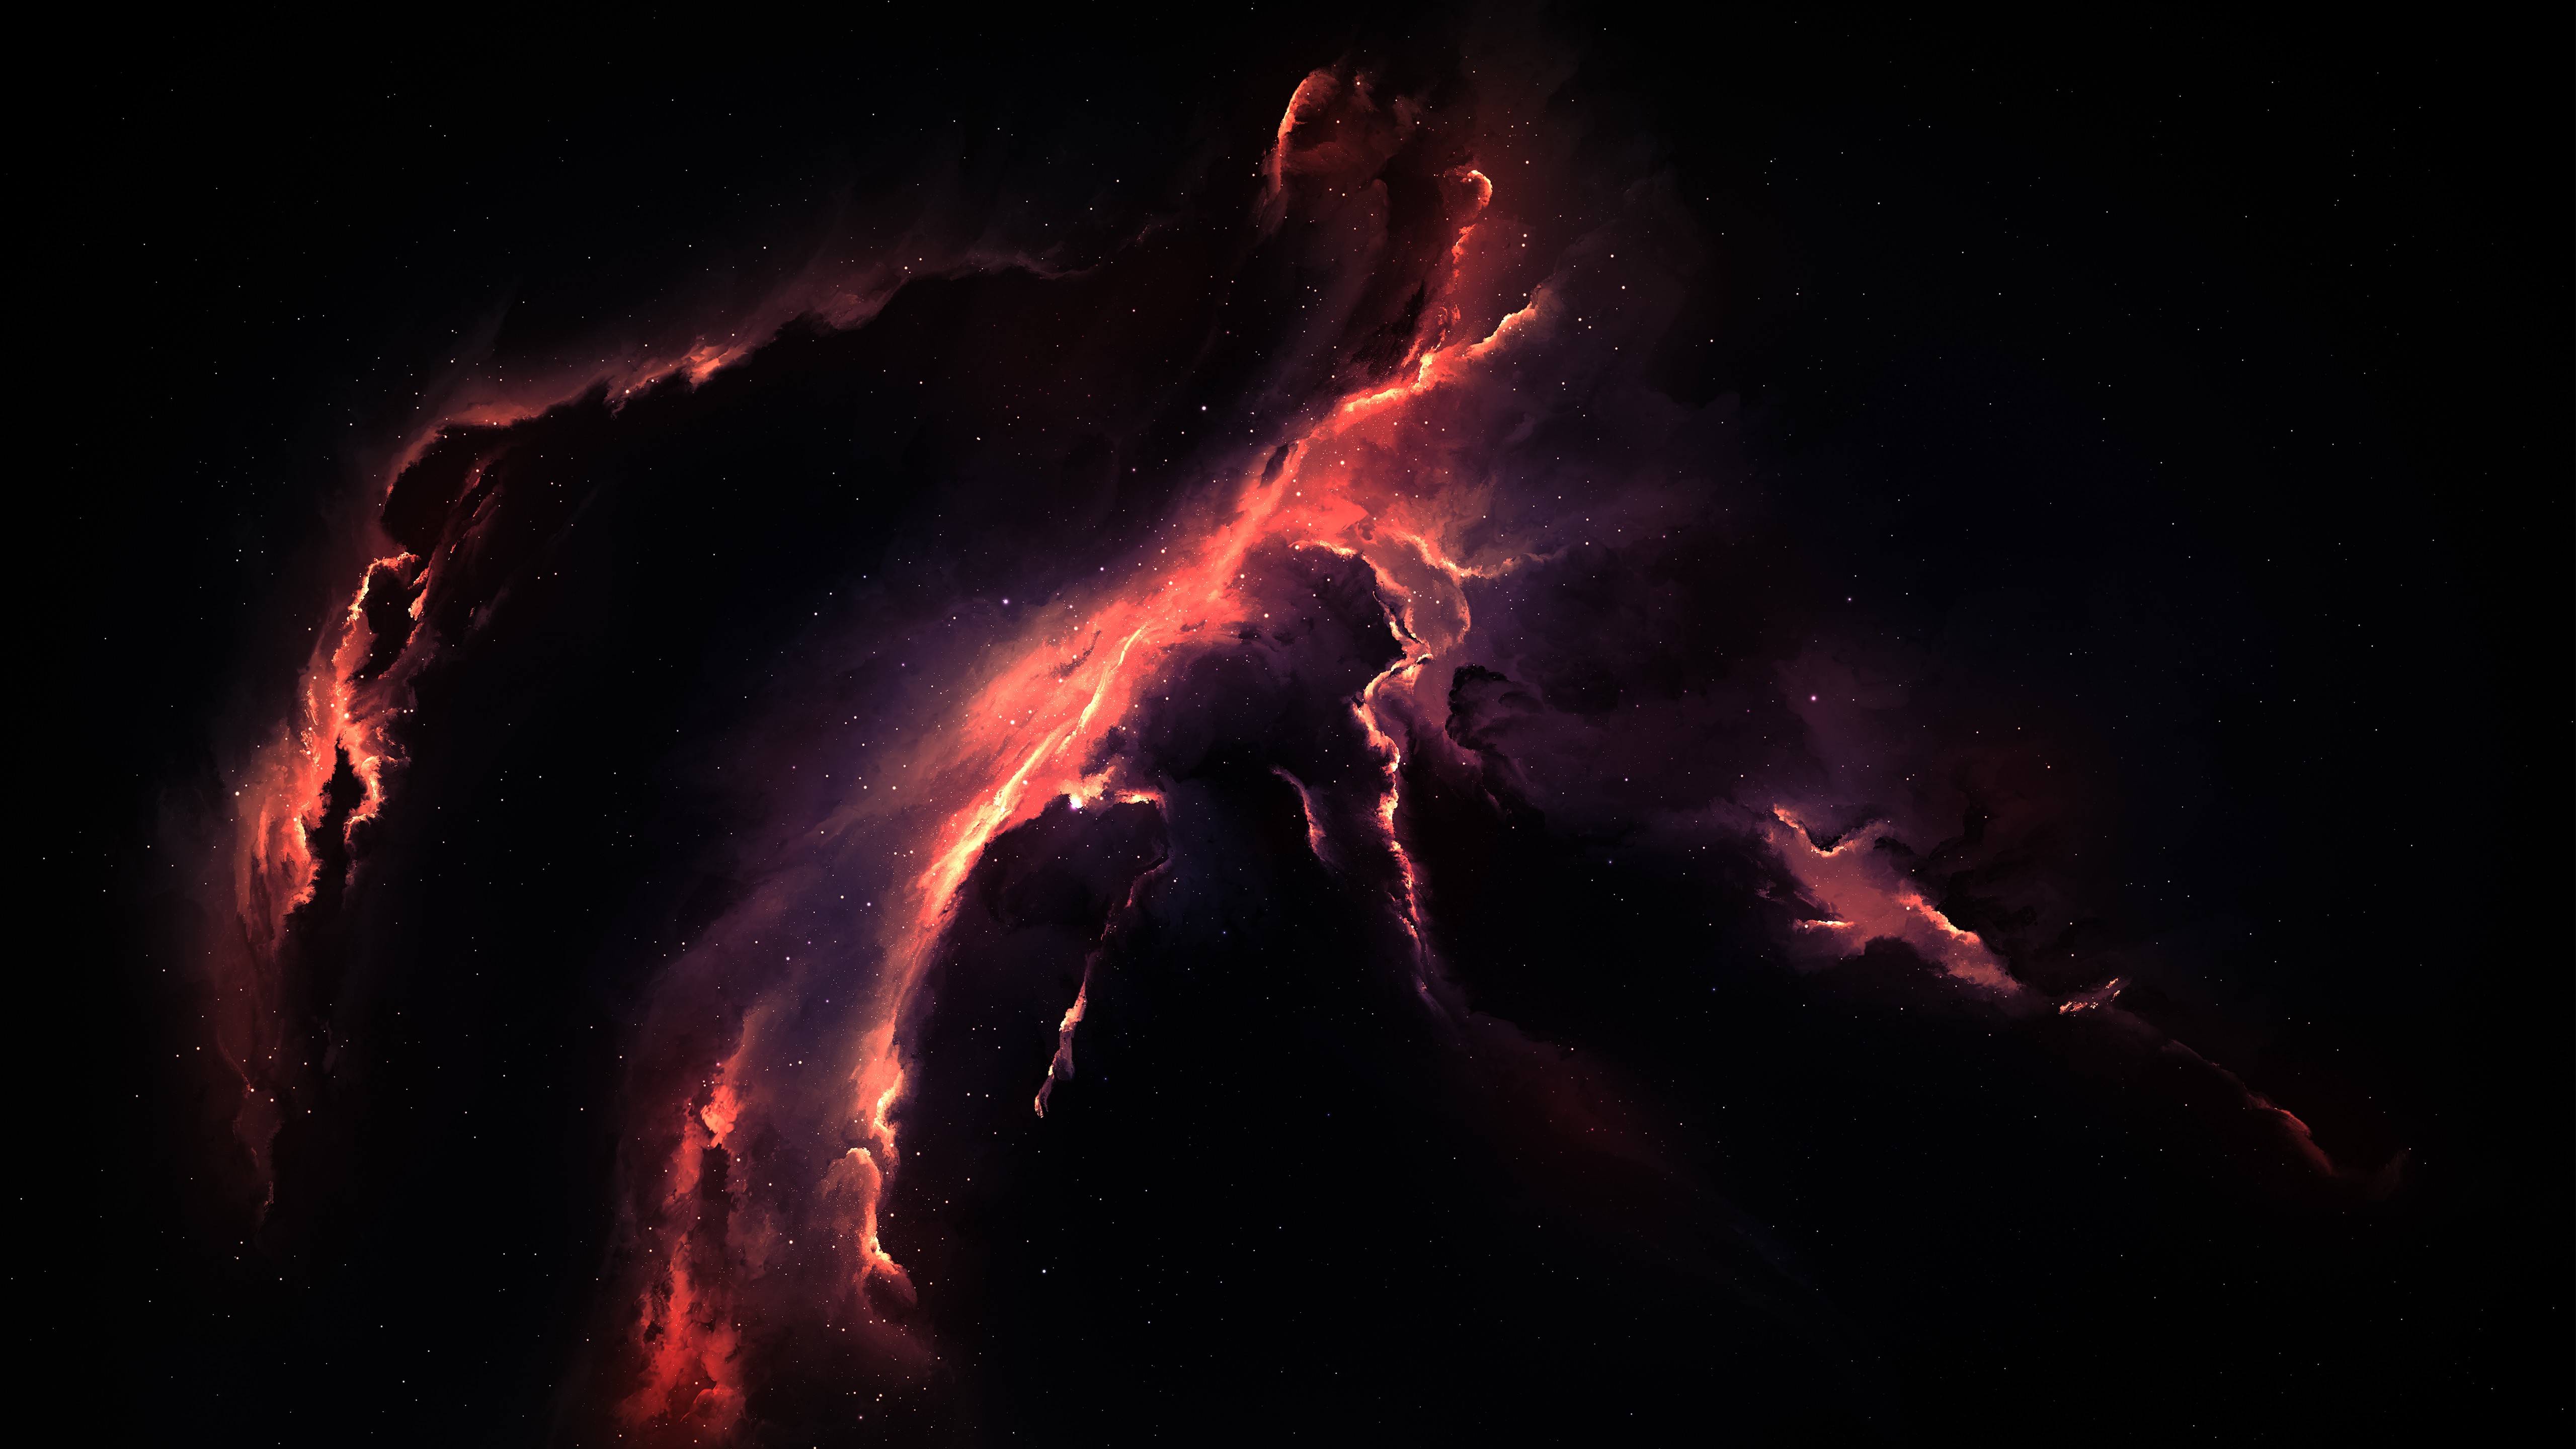 Wallpaper, night, abstract, sky, space art, nebula, atmosphere, universe, Starkiteckt, flame, darkness, 5120x2880 px, computer wallpaper, special effects, outer space, geological phenomenon, types of volcanic eruptions 5120x2880